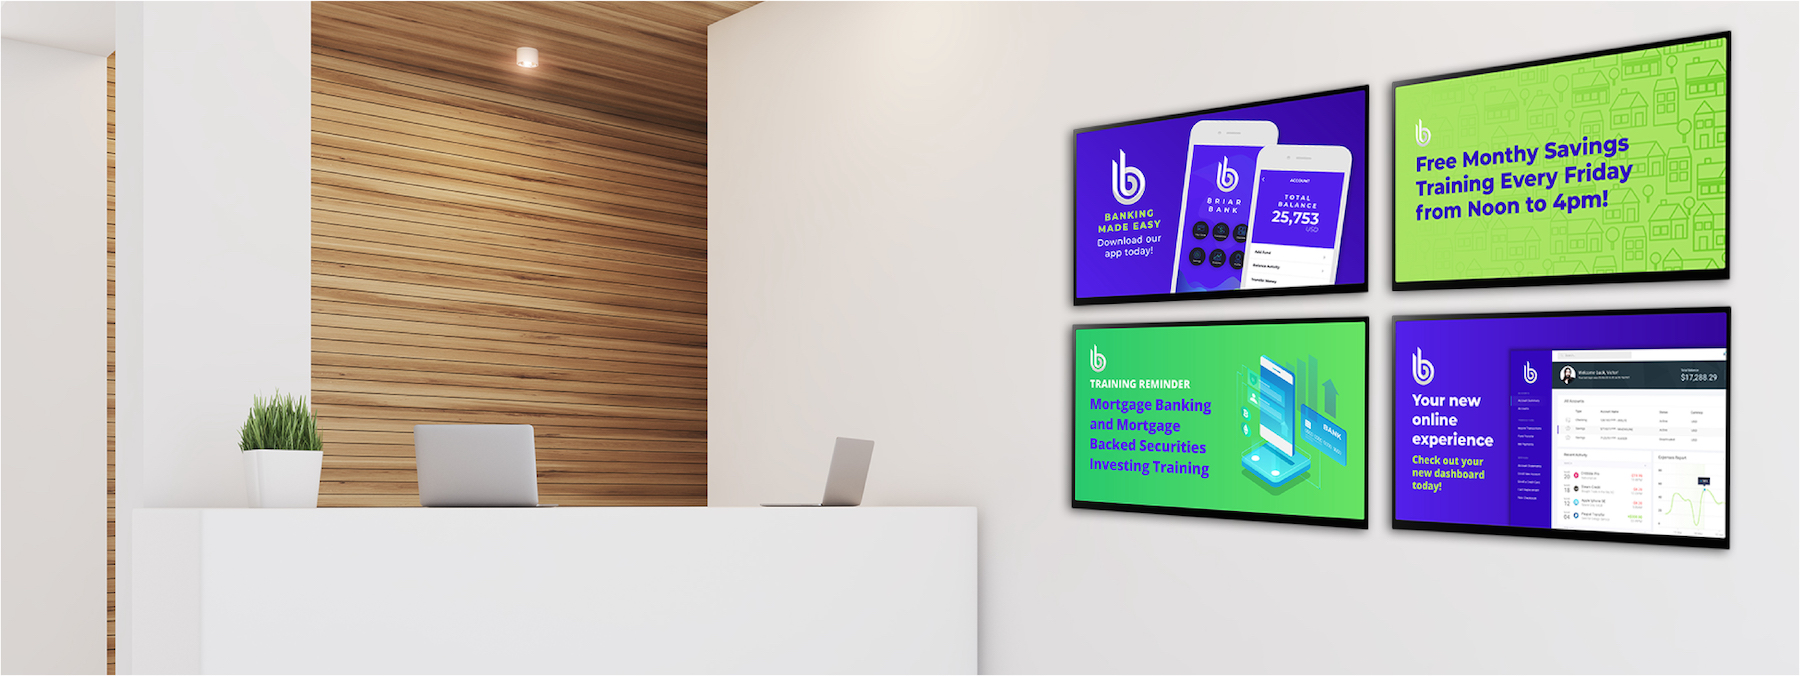 Skykit Digital Signage Used in Banking and Financial Institutions